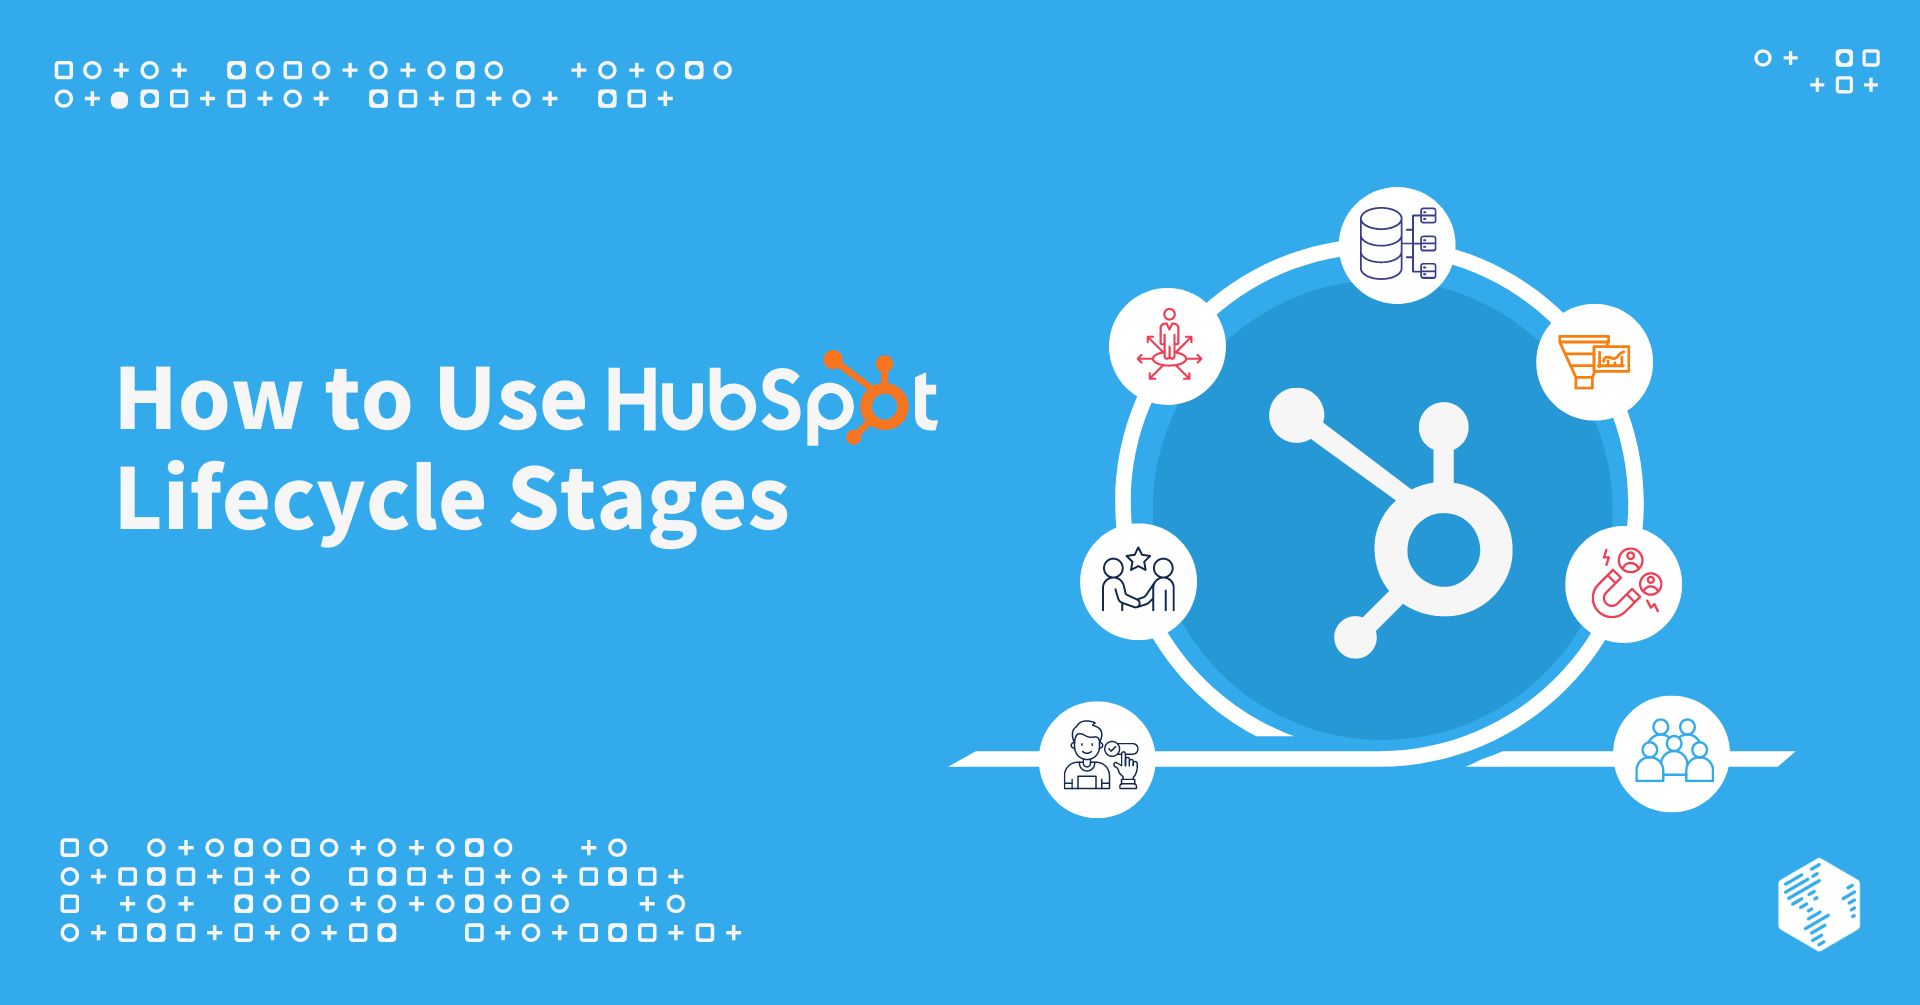 HubSpot Lifecycle Stages: What They Are and How to Use Them